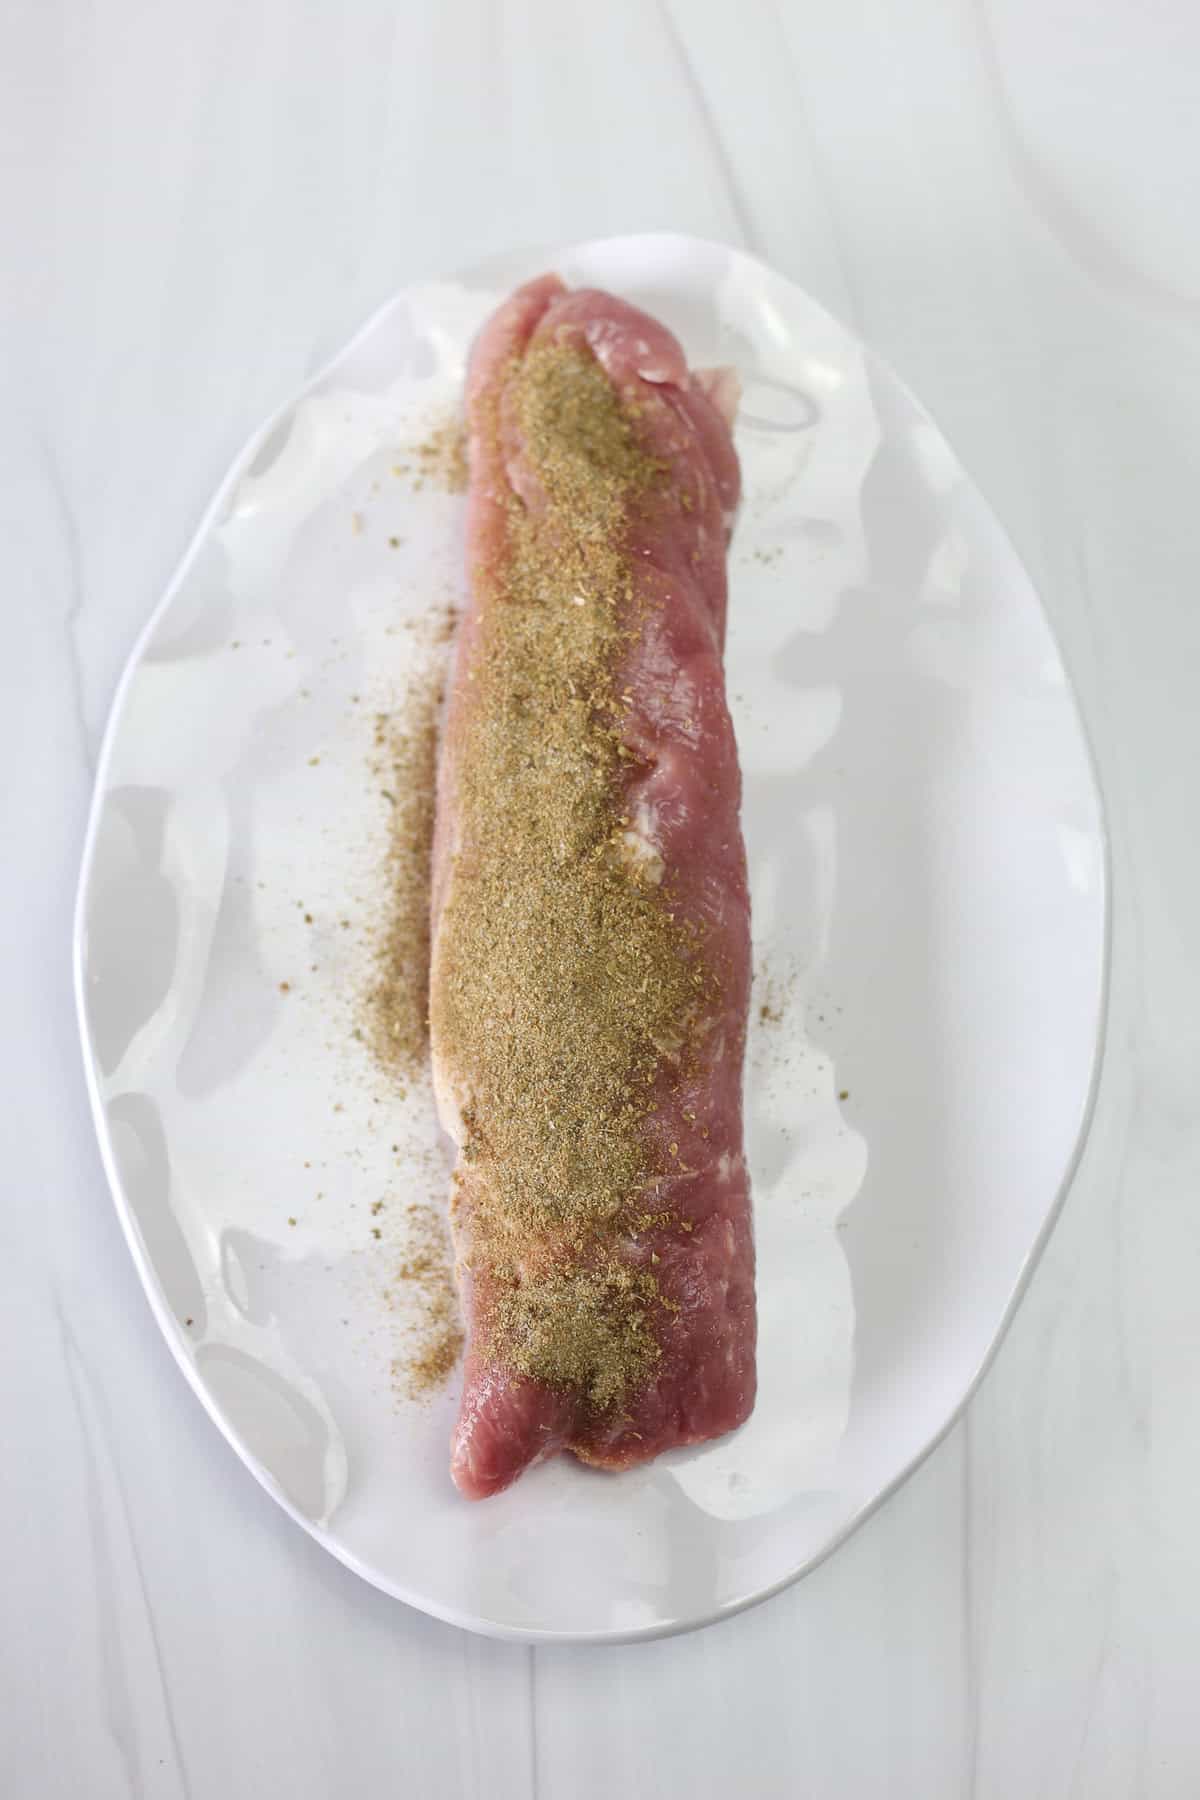 A pork tenderloin with a dry rub sprinkled over top ready to be rubbed in.